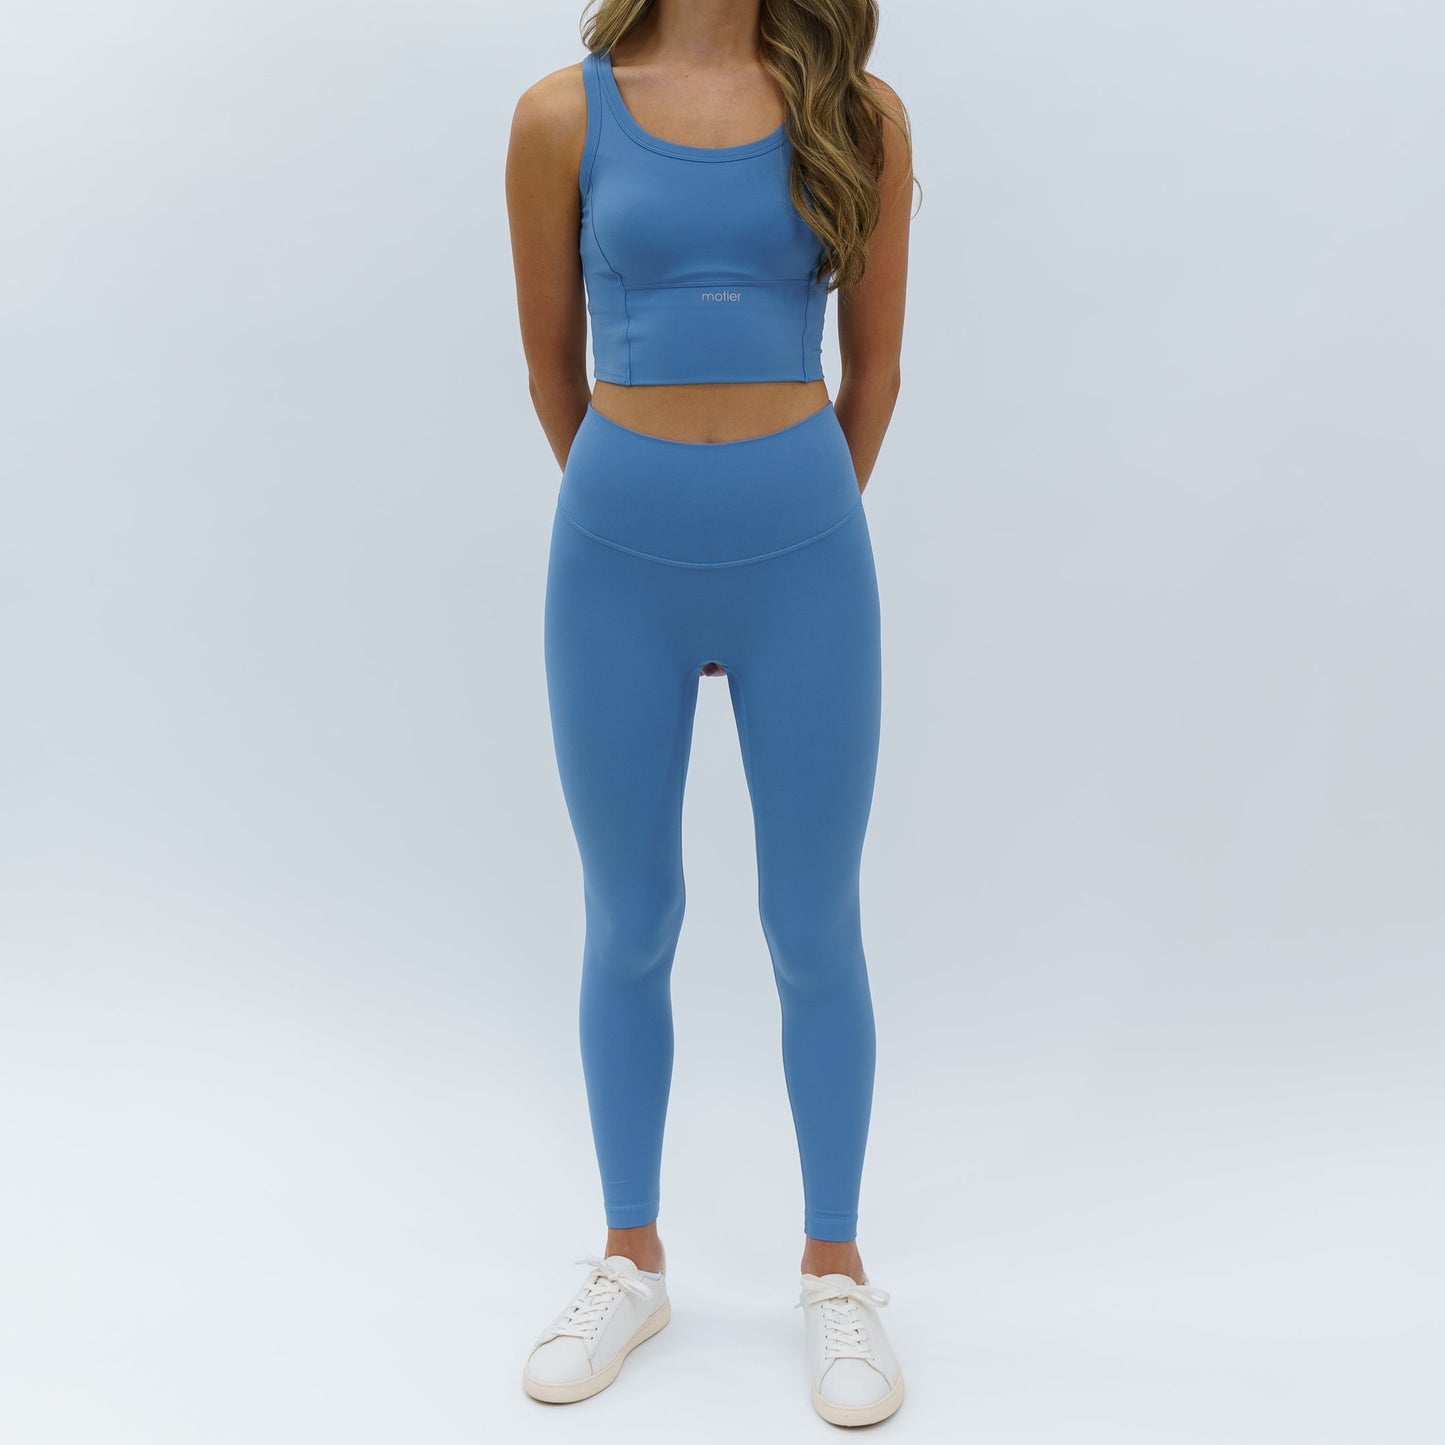 The Nyx Molded Cup Sports Bra (Azure Blue)